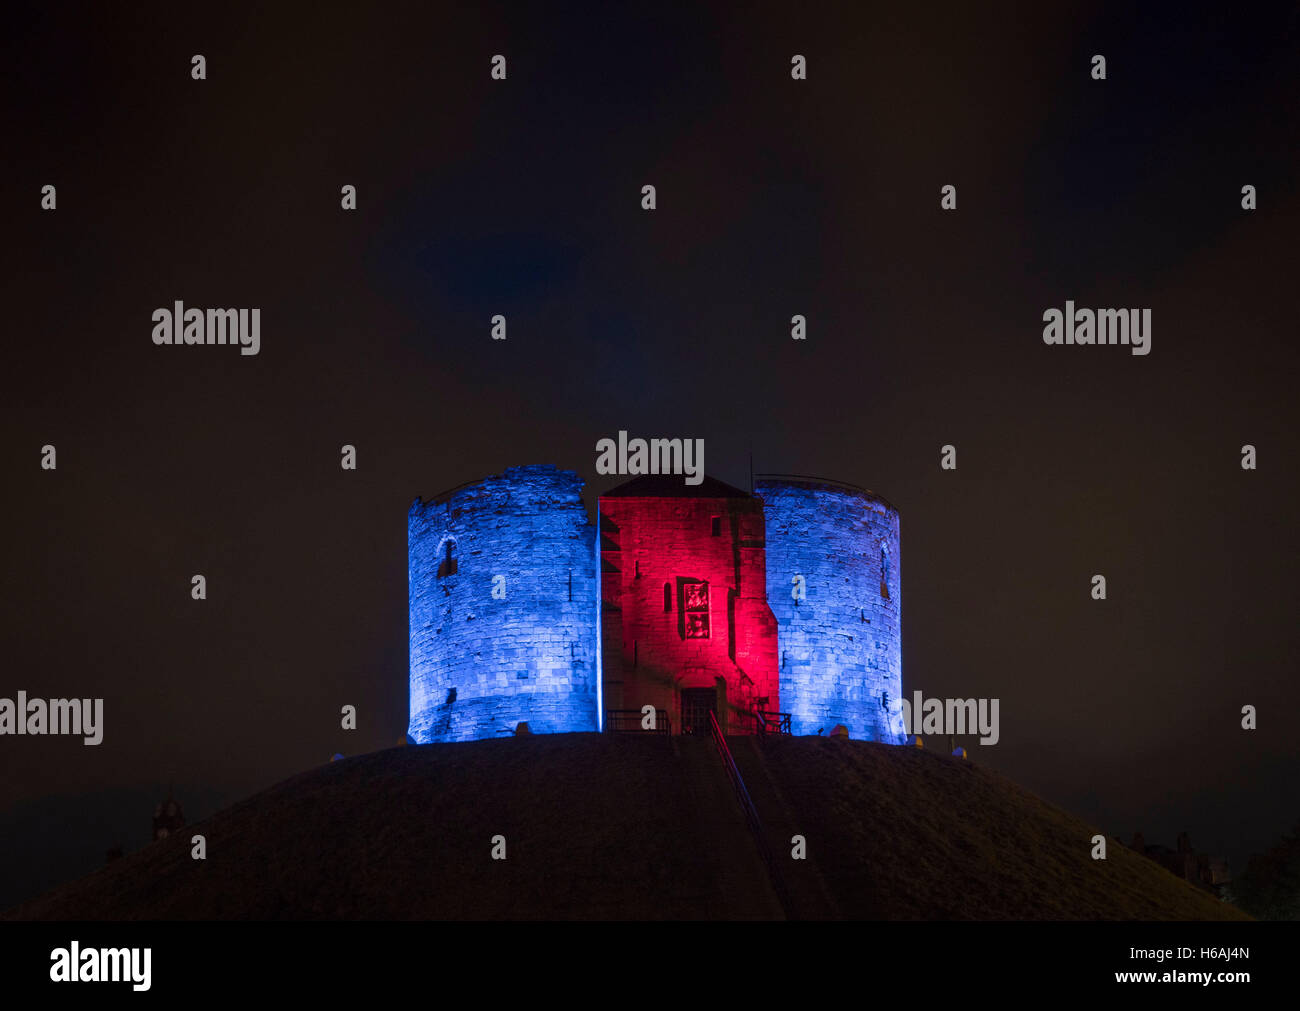 York, UK. 26th October, 2016. First night of the Illuminating York Festival which sees iconic buildings transformed using light painting and installations from international artists. Photo shows the iconic Cliffords Tower bathed in light by LumenPulse. The festival runs until Saturday October 29th. Photo Bailey-Cooper Photography/Alamy Live News Stock Photo